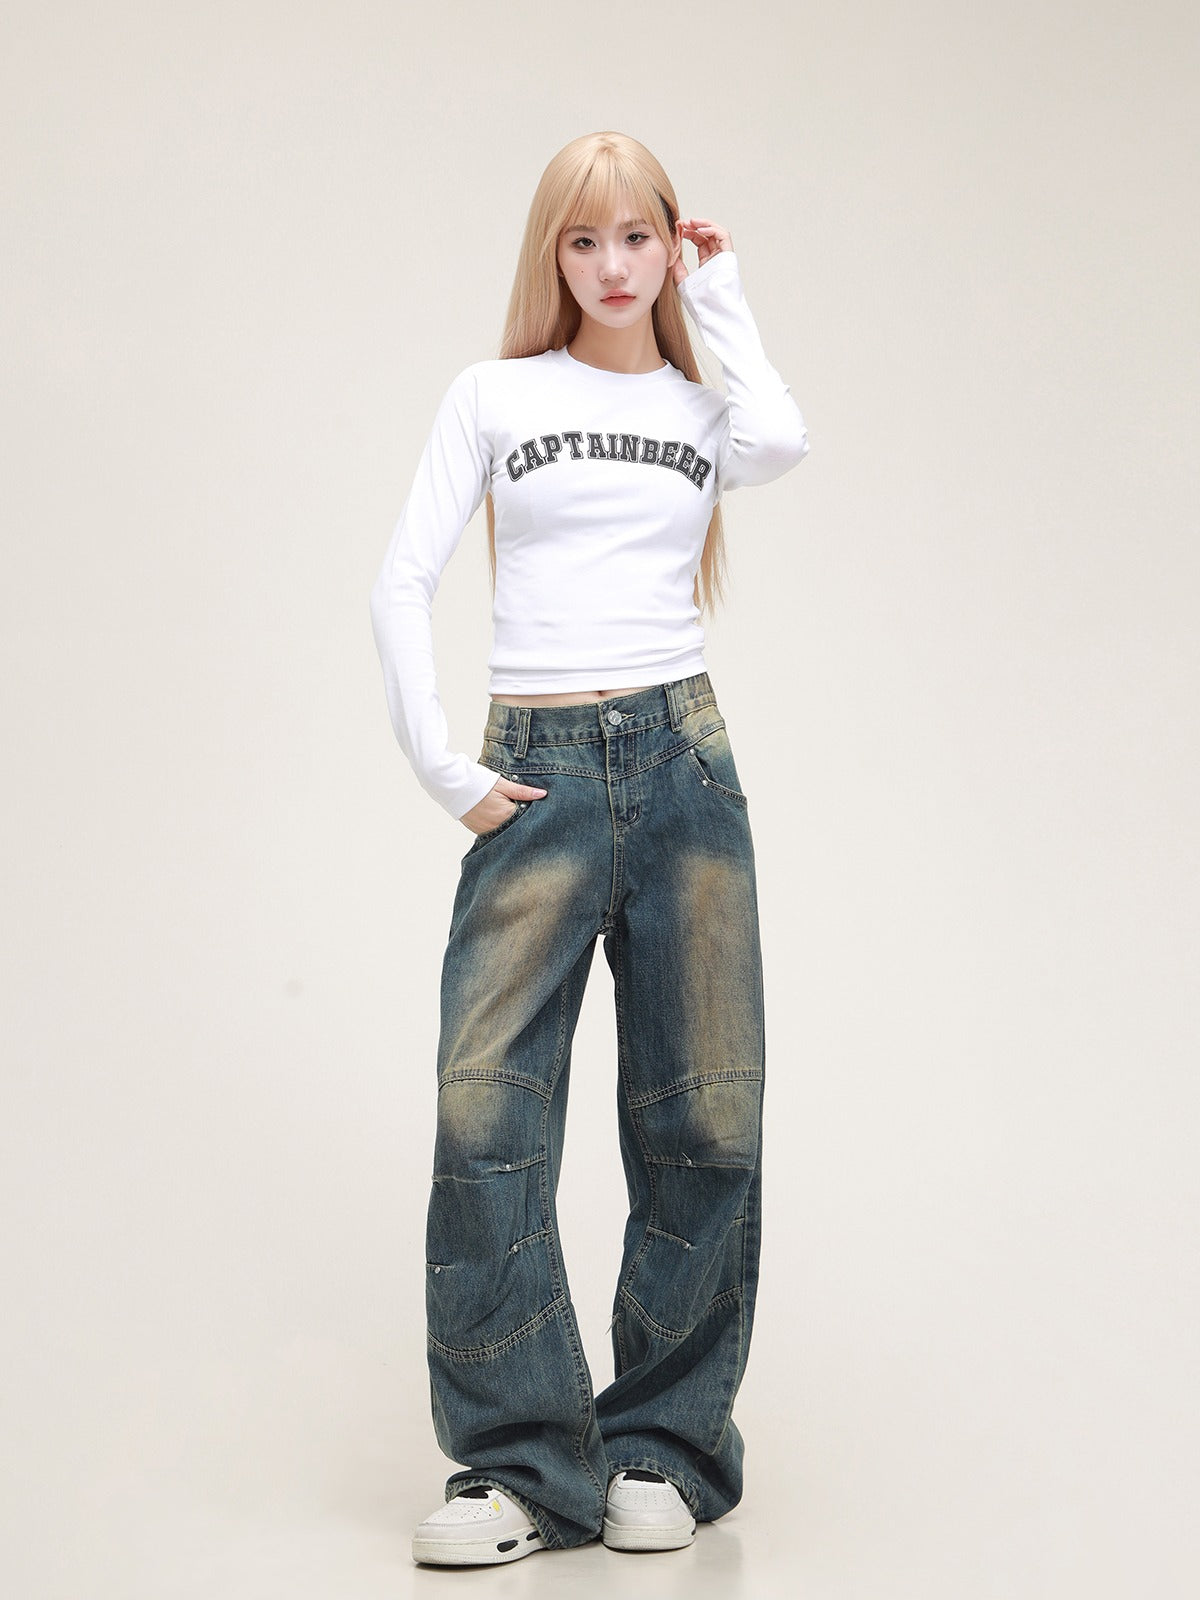 American studded jeans pants